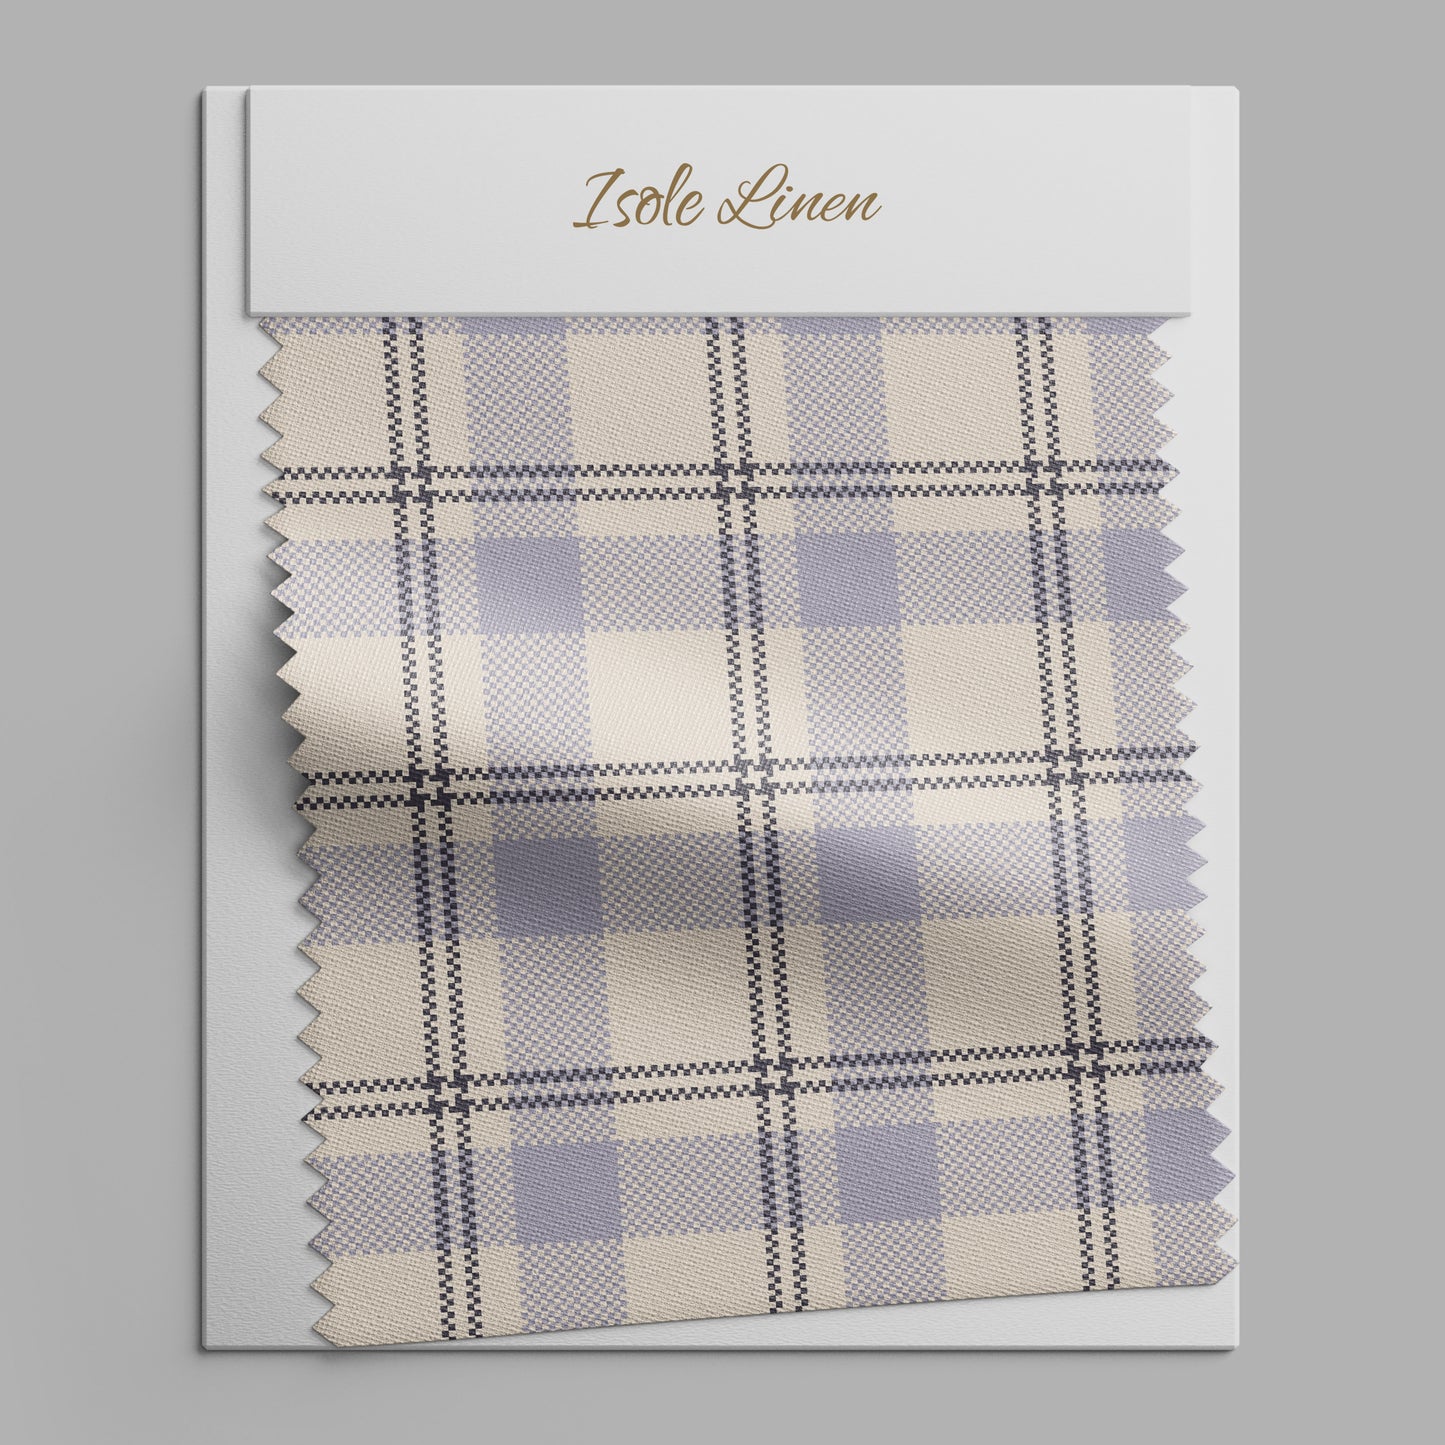 Retro Plaid Print Linen By The Yard or Meter, Retro Checkered Print Linen Fabric For Clothing, Bedding, Curtains & Upholstery